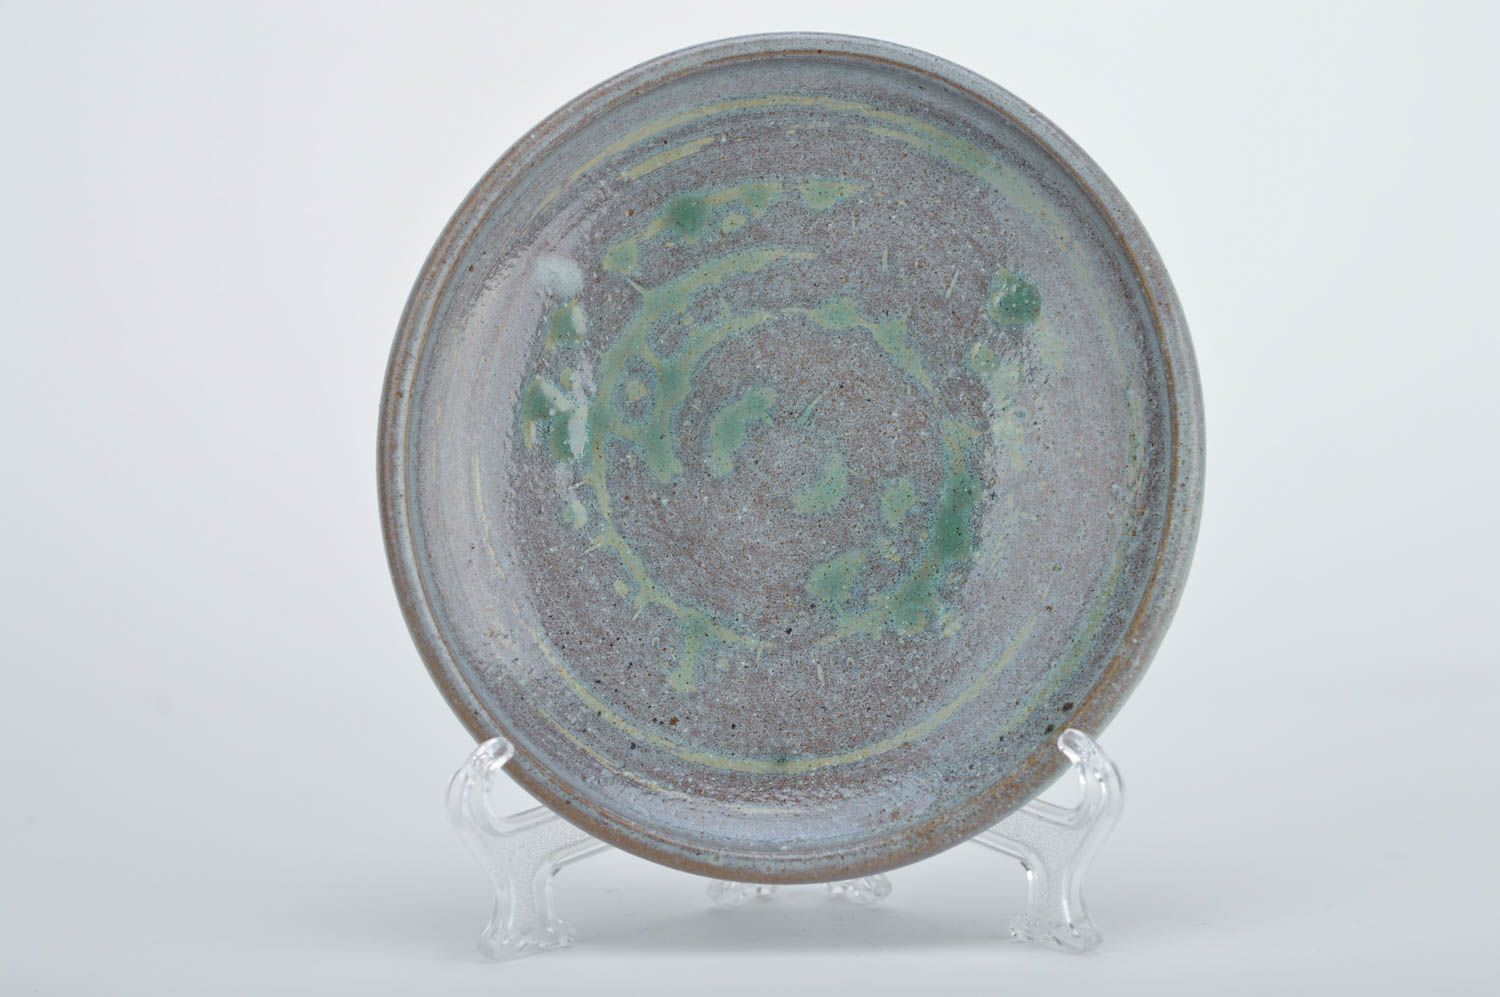 Handmade decorative round ceramic plate coated with glaze in blue green colors photo 1